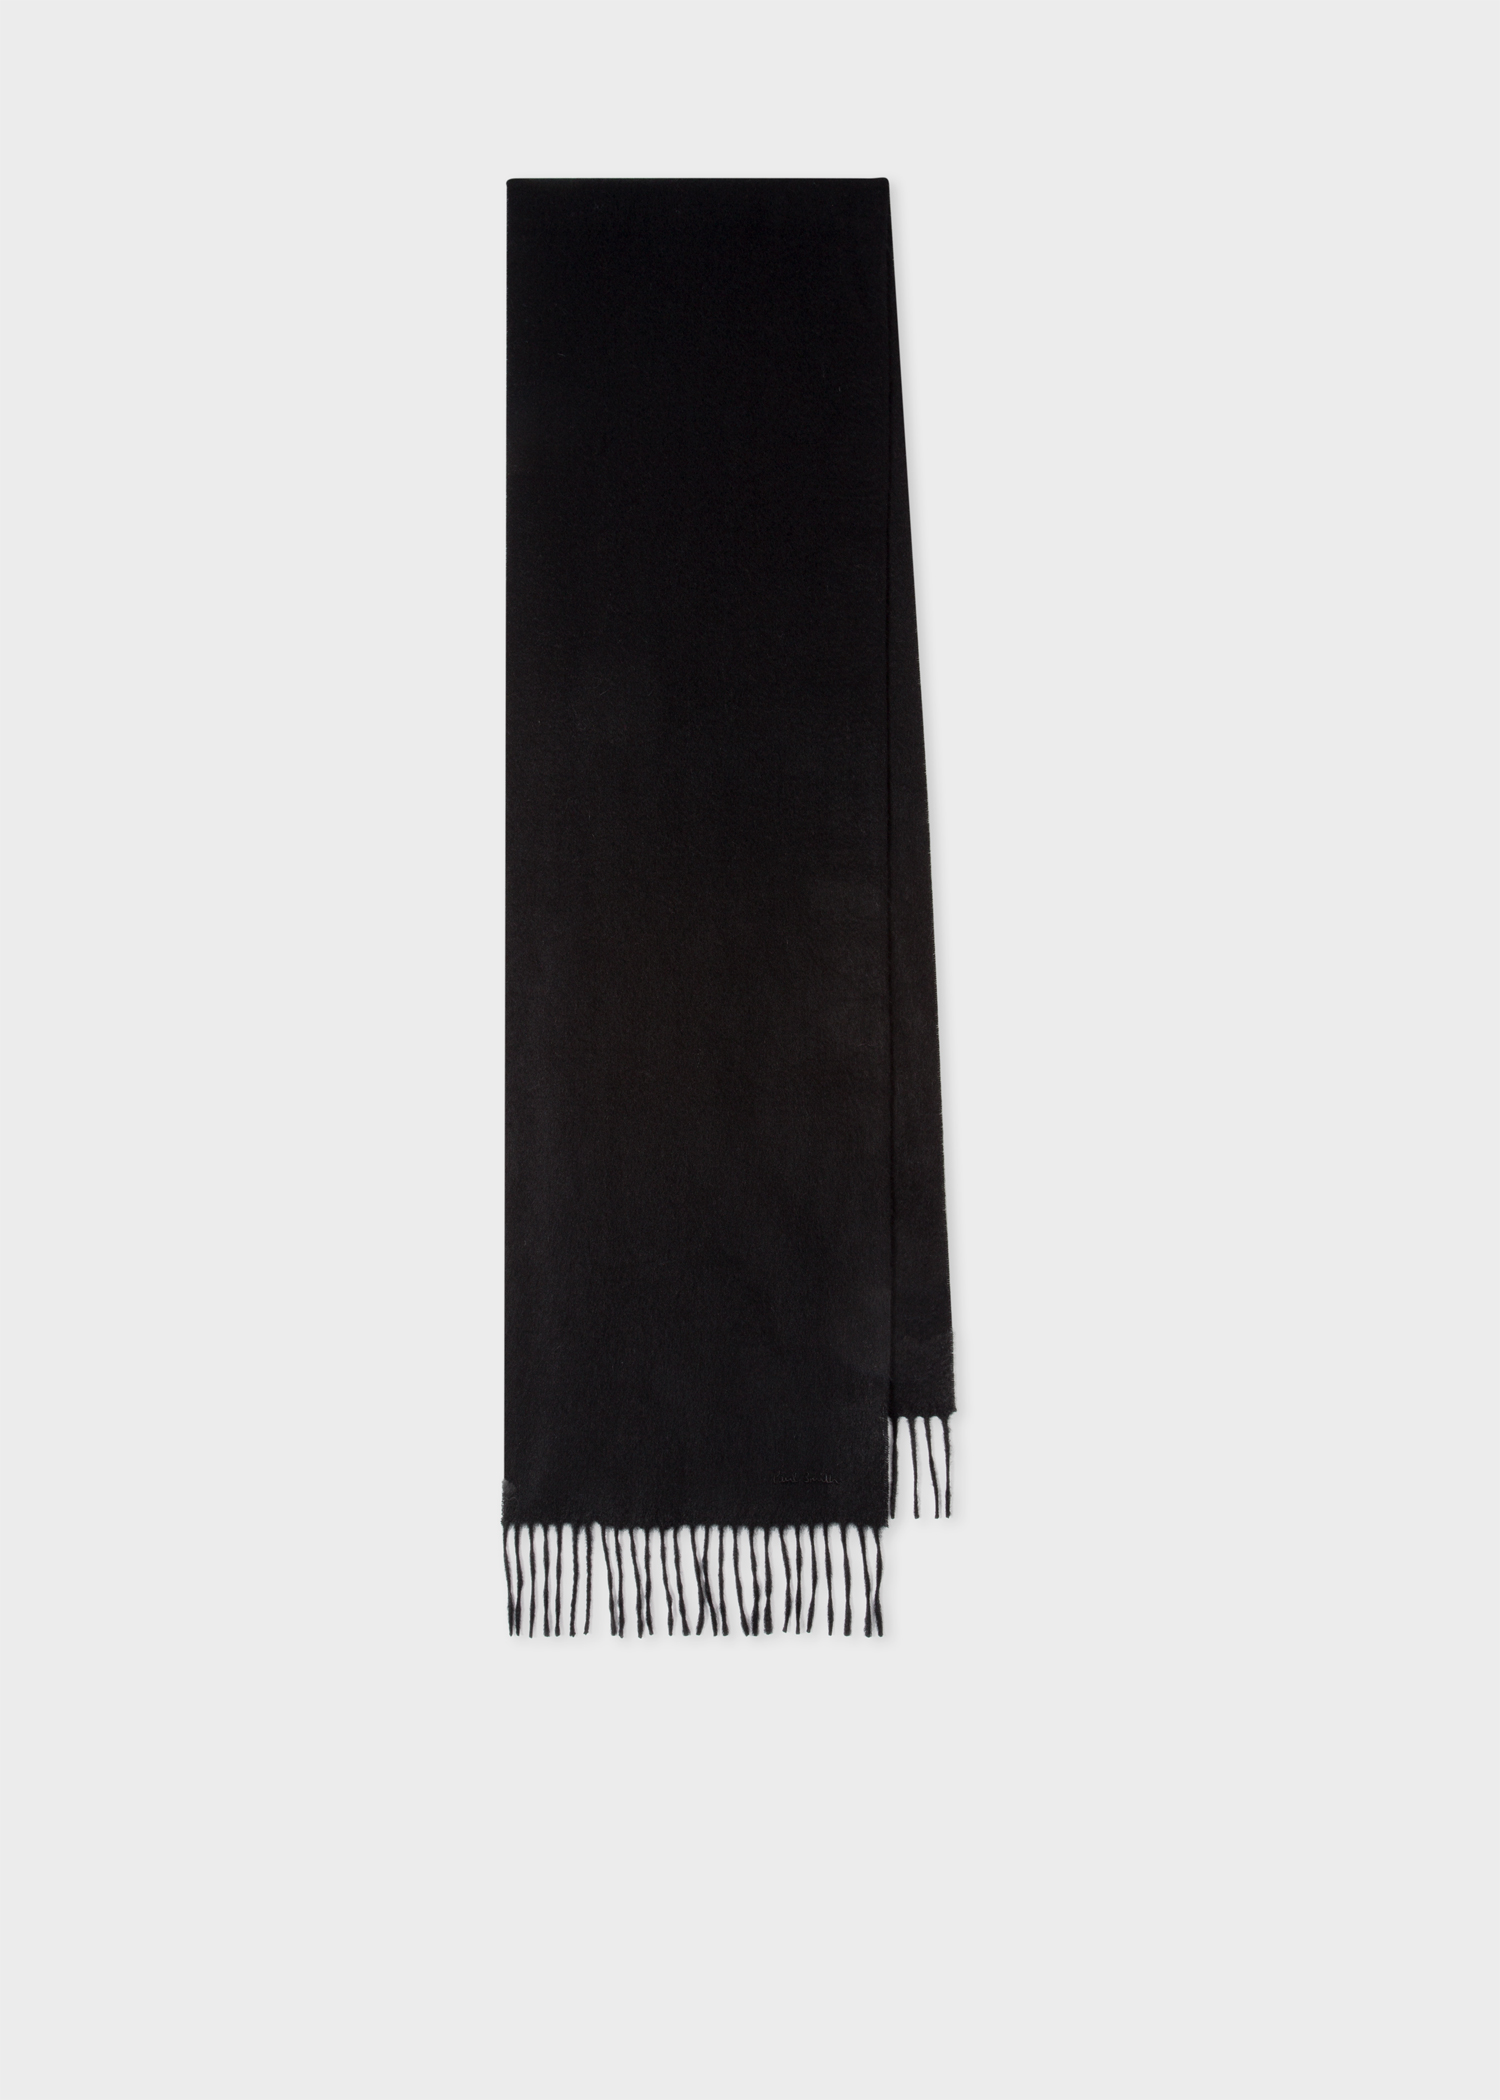 Black Cashmere Scarf by Paul Smith